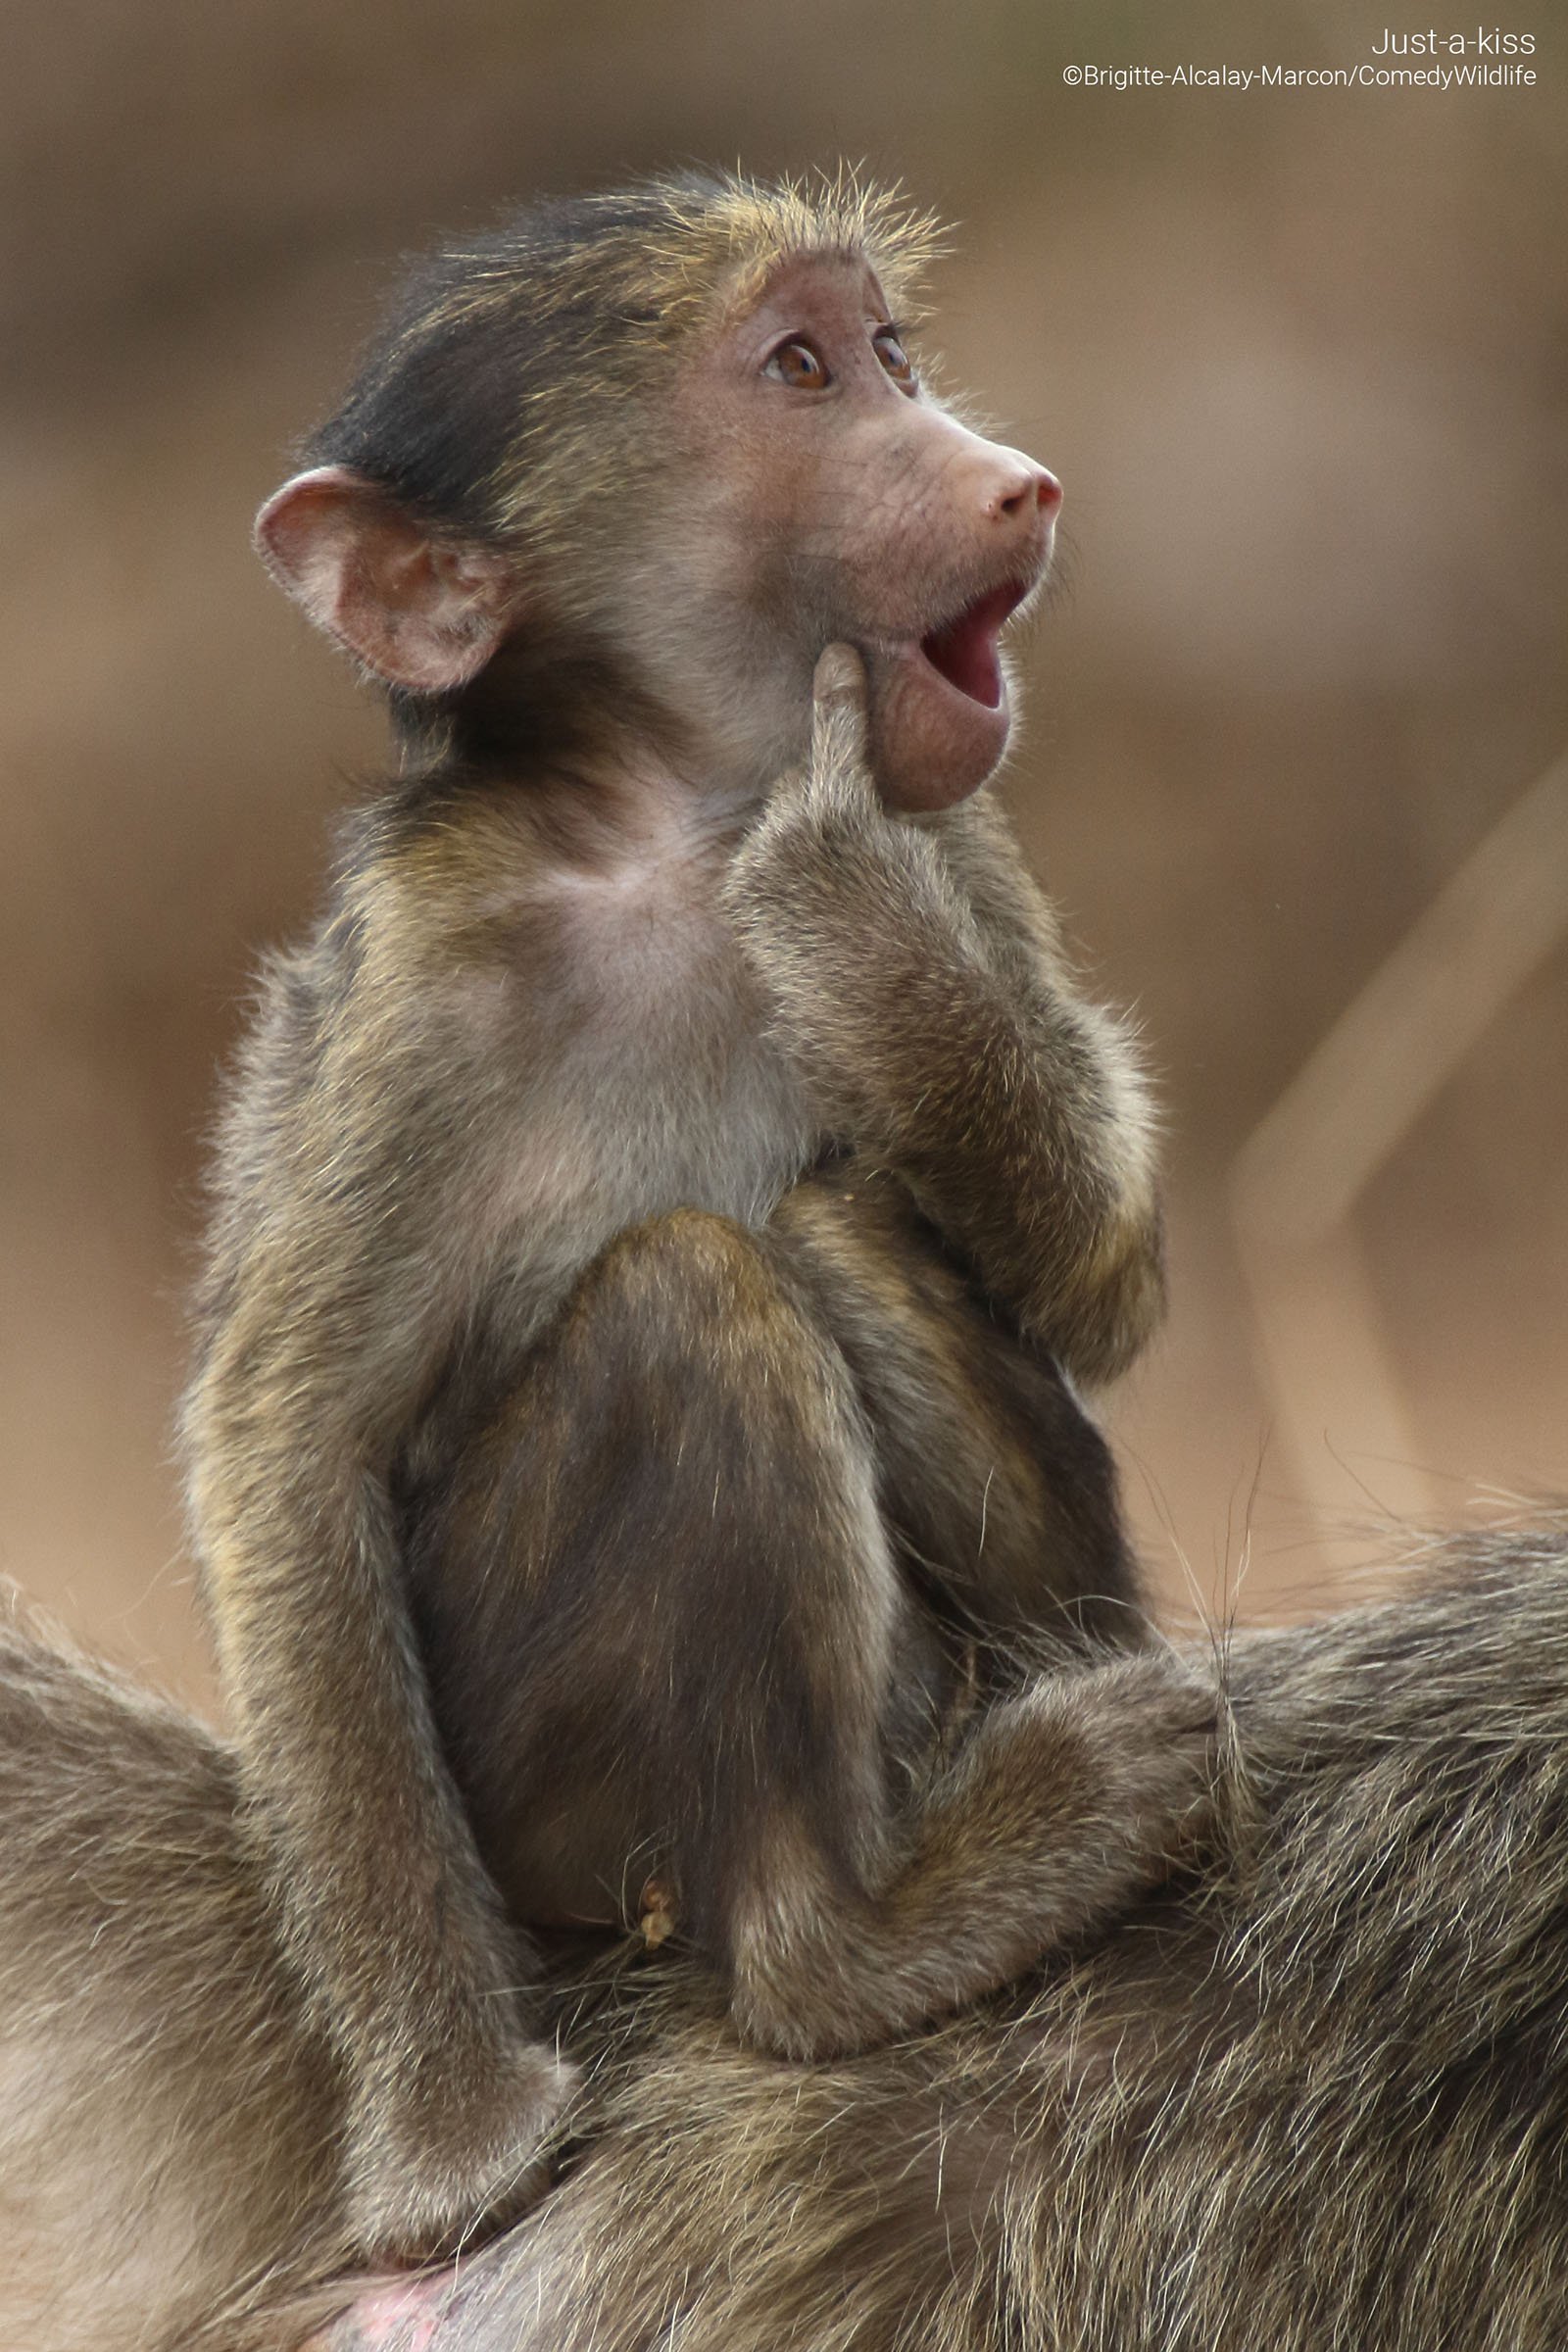 A young chacma baboon is sitting on its mother back in a cute pose.